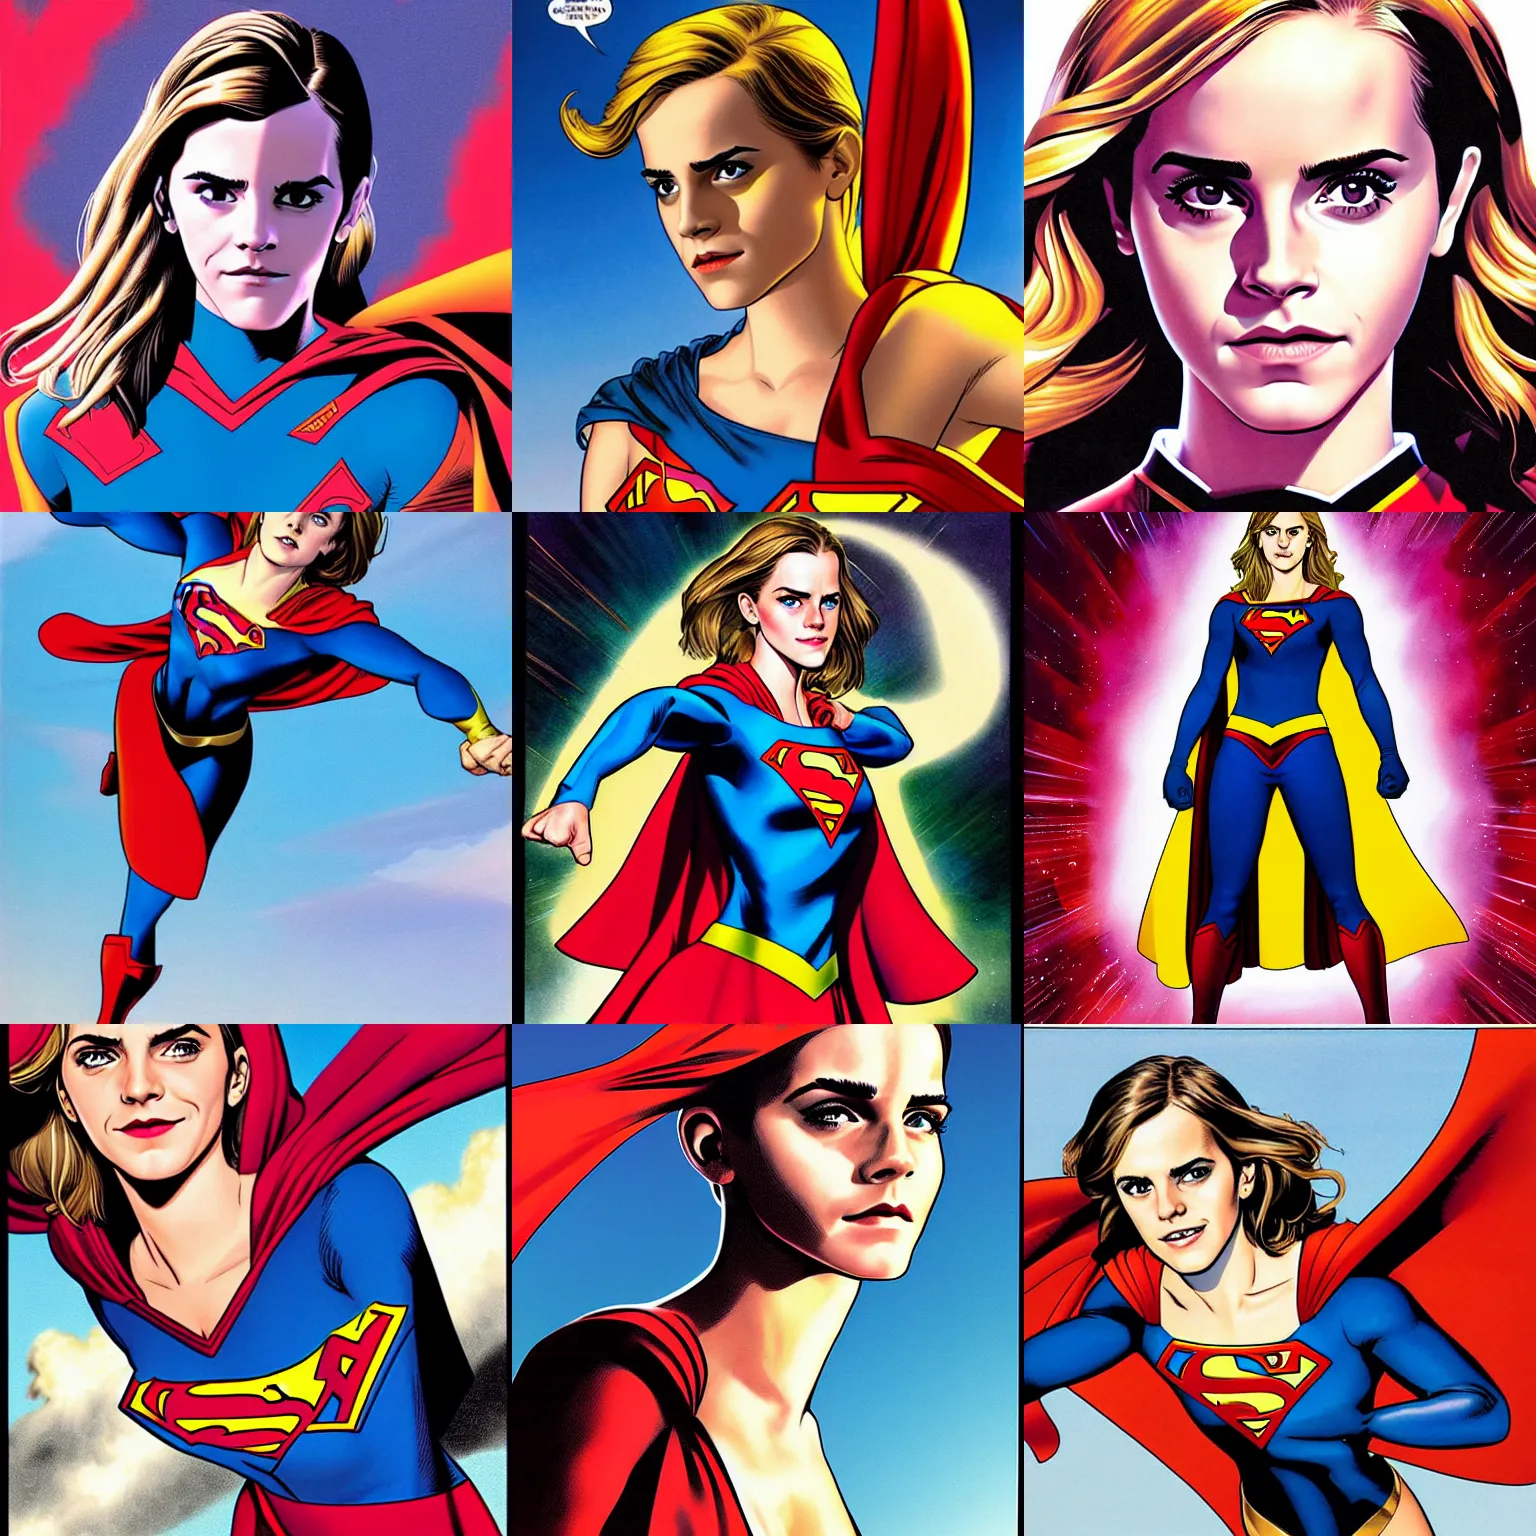 Prompt: Emma Watson as supergirl by brian bolland by alex ross digital painting digital art